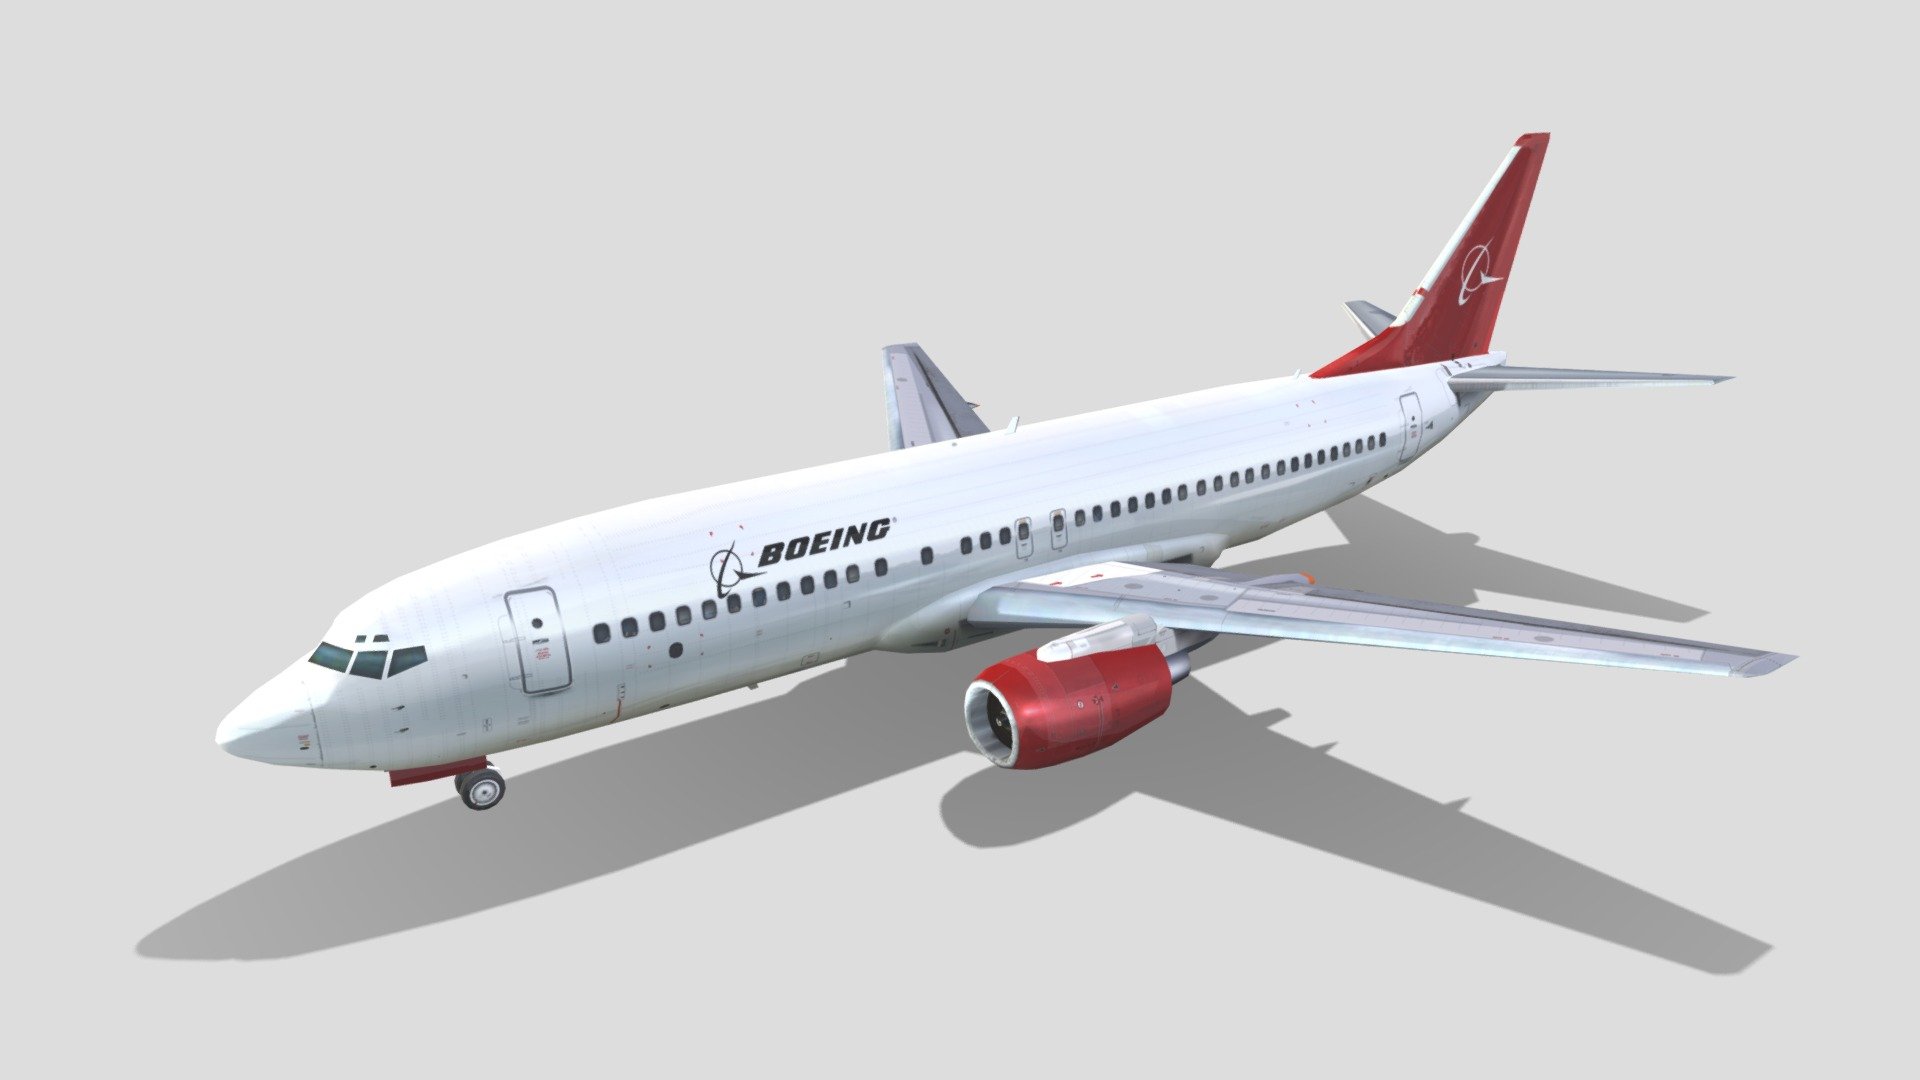 This is a meticulously crafted 3D low-poly model of a Boeing 737-400, optimized for minimal complexity with less than 5000 polygons. Despite its low polygon count, the model accurately captures the iconic design and aerodynamic features of the Boeing 737-400, making it ideal for real-time rendering in games or simulations.

The model comes with a blank layered texture, providing a clean slate for customization. This allows you to apply your own color schemes, decals, or airline branding. The layered structure of the texture file offers flexibility in modifying different parts of the aircraft separately, such as the fuselage, wings, engines, and tail.

In summary, this Boeing 737-400 low-poly model is a perfect blend of simplicity, accuracy, and customizability, making it a versatile asset for any 3D project.
This model is available in Sketchfab, CGTrader and Turbosquid, thanks for looking! dont forget to check my other models - Boeing 737-400 B734 static lowpoly - Buy Royalty Free 3D model by hangarcerouno 3d model